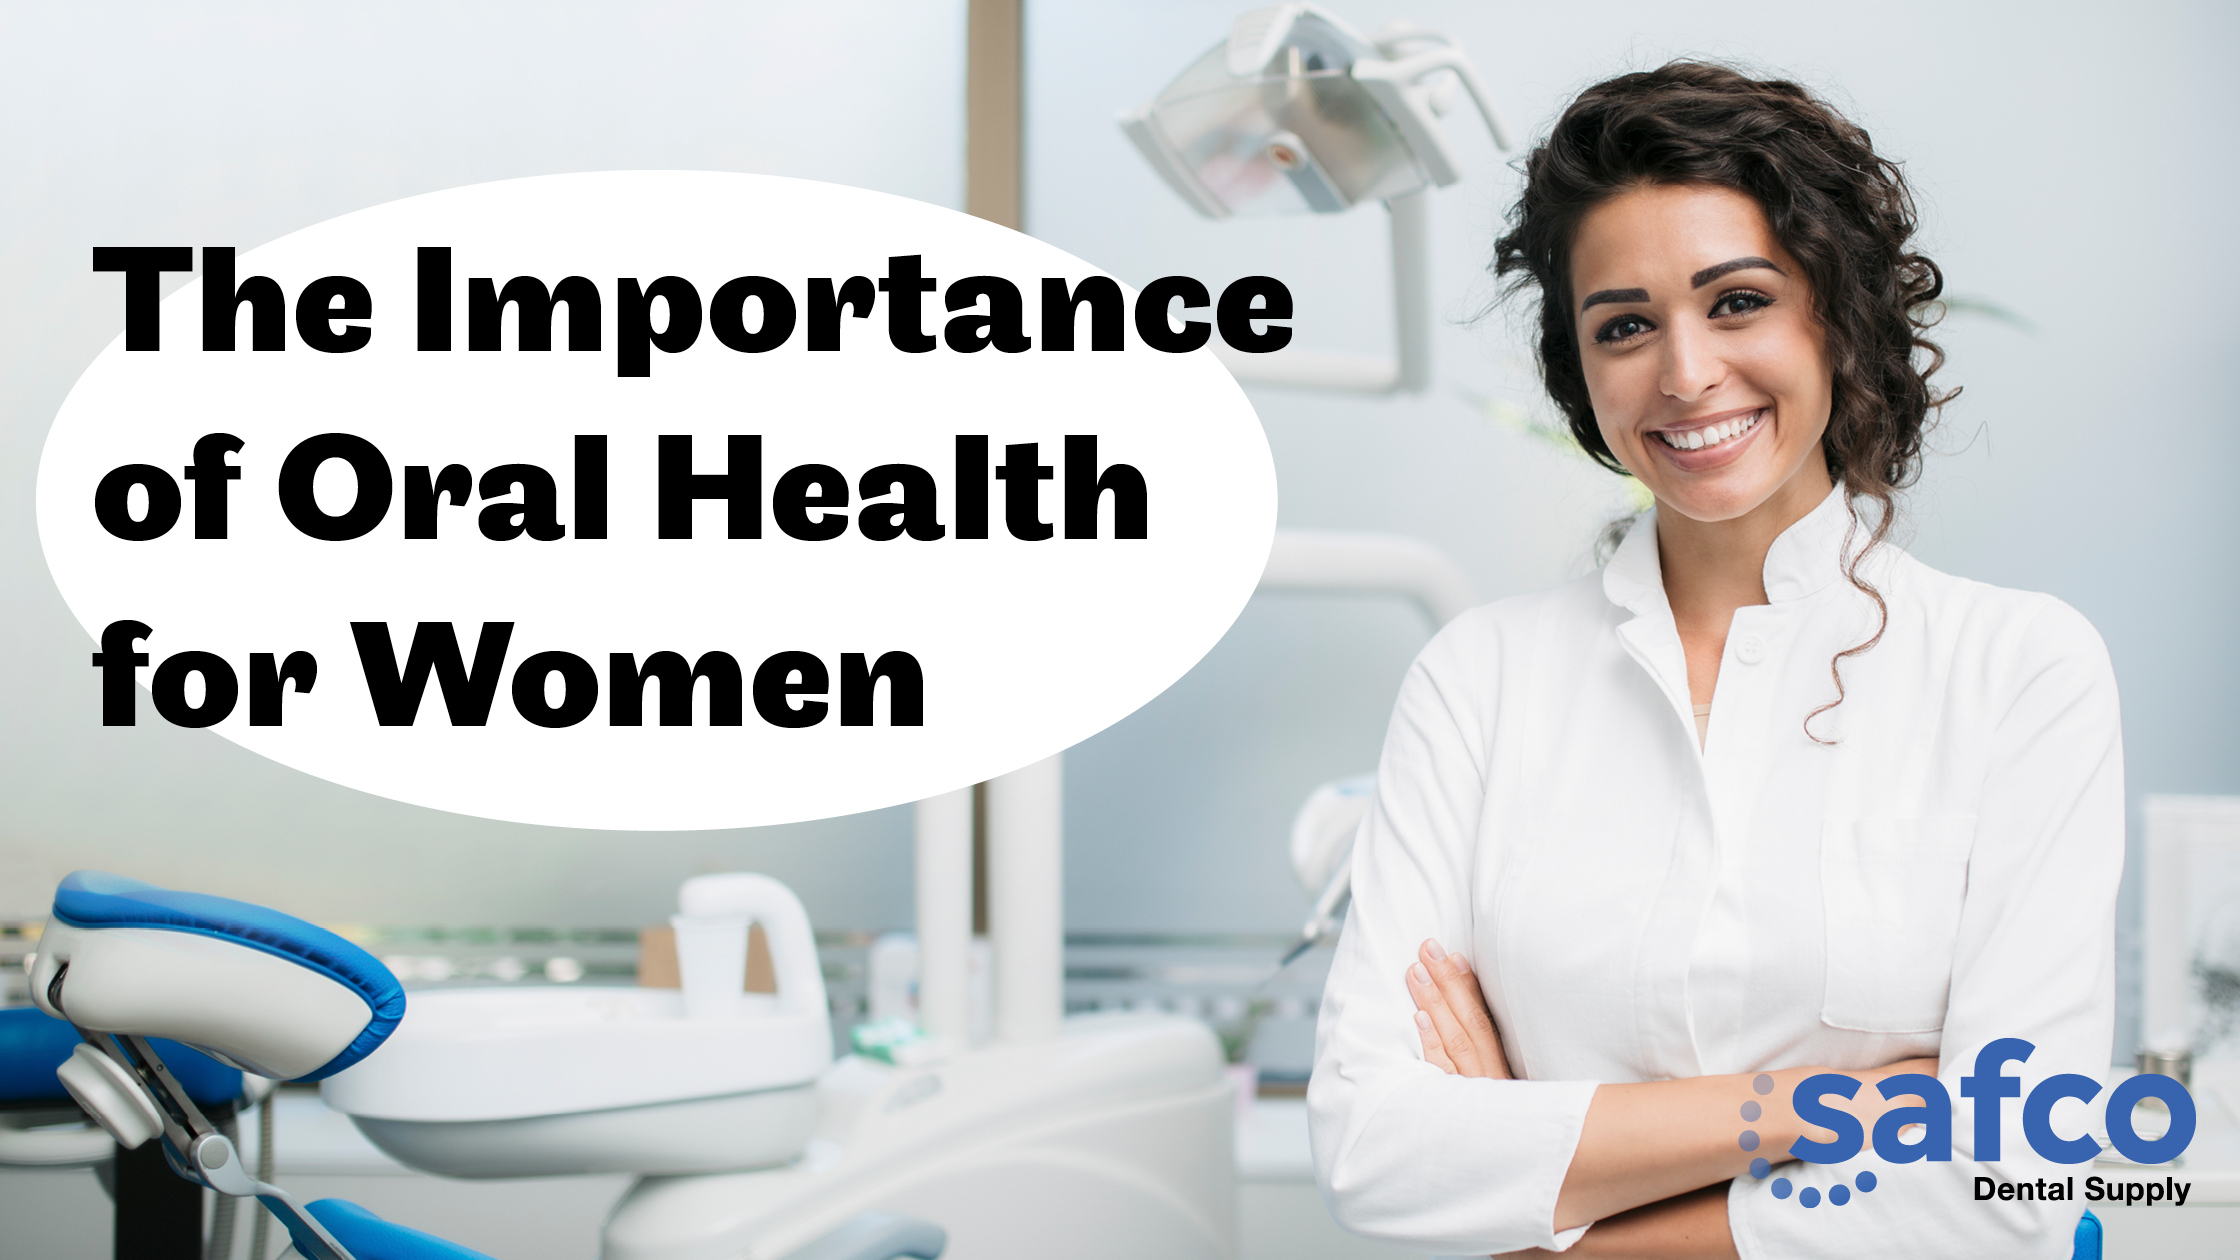 The Importance of Oral Health for Women